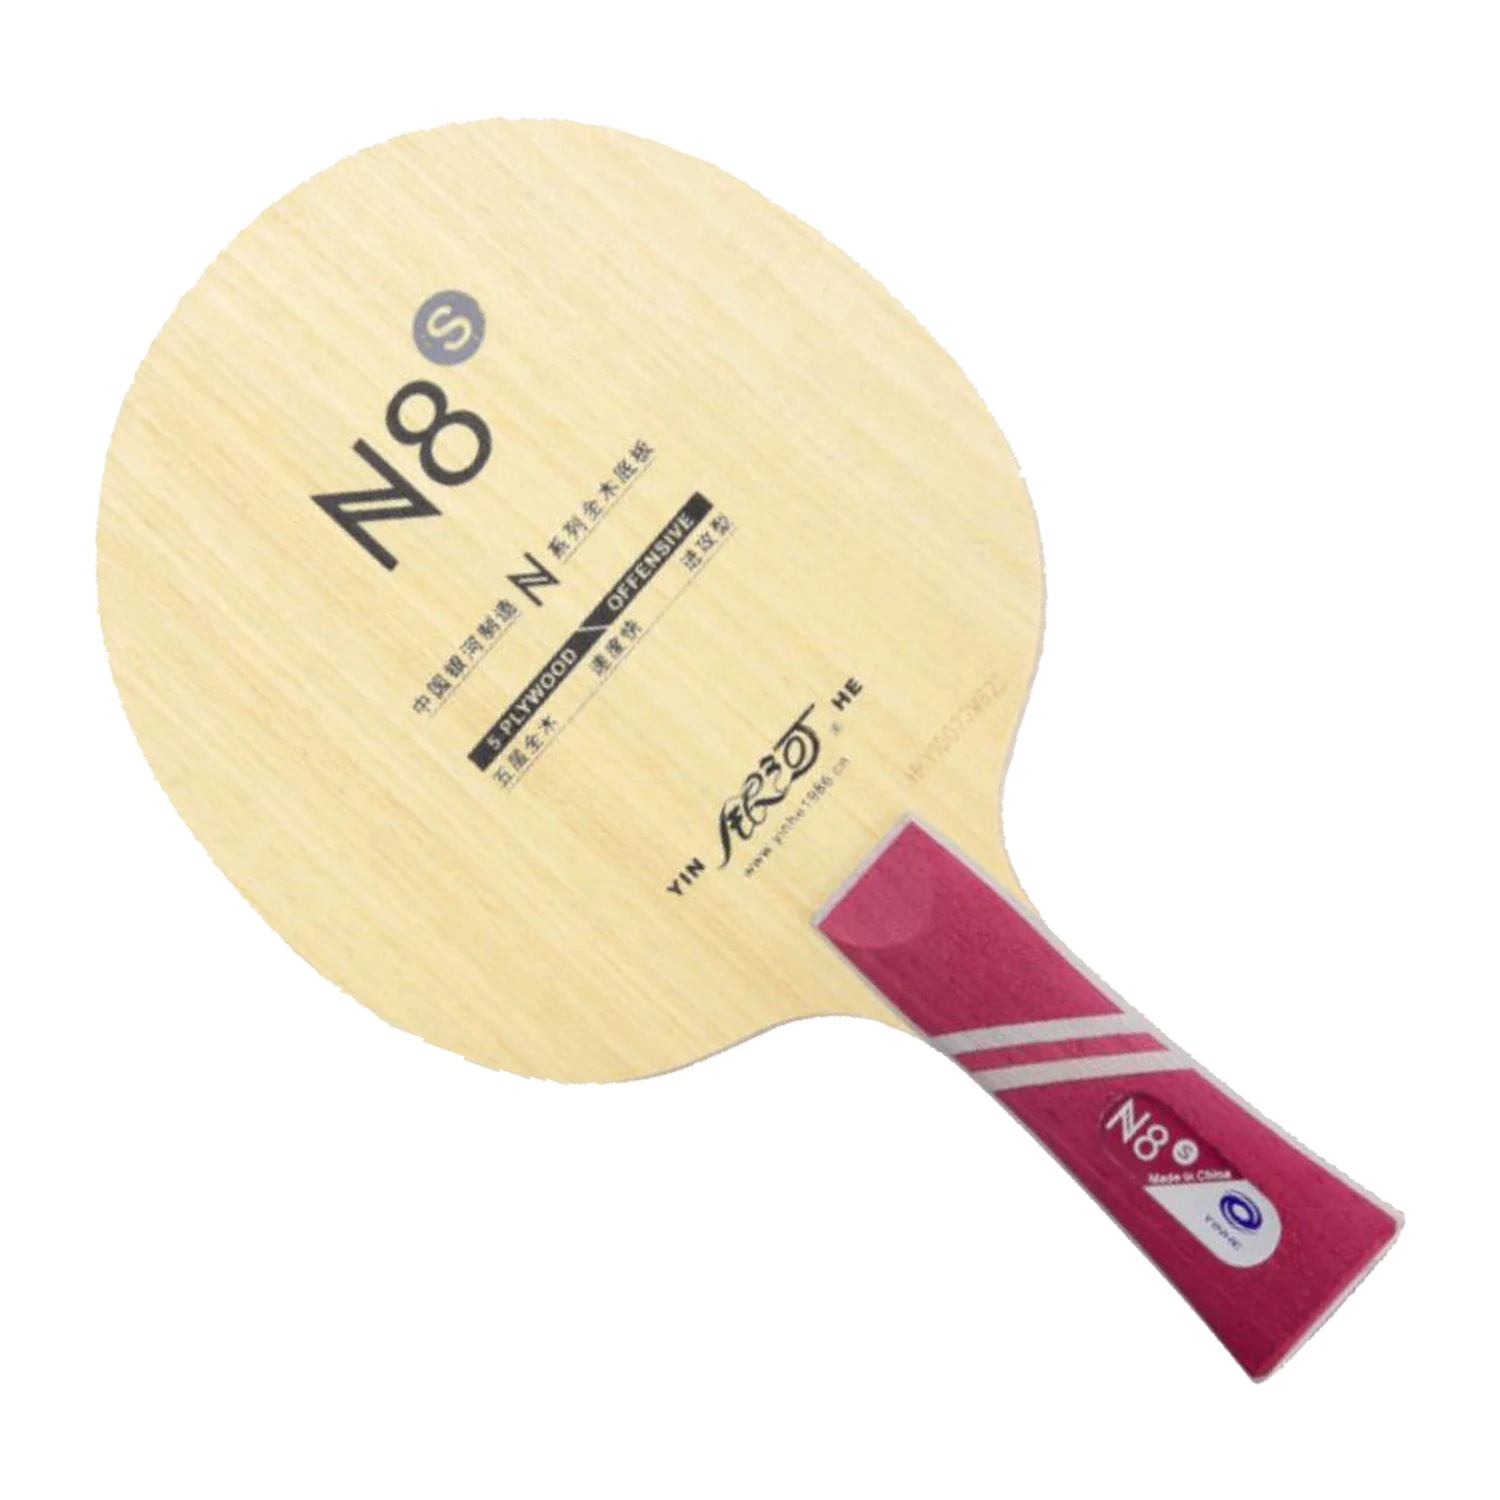 

Yinhe N8s N-8s pure wood N-8s professional table tennis blade for beginner table tennis rackets racquet sports